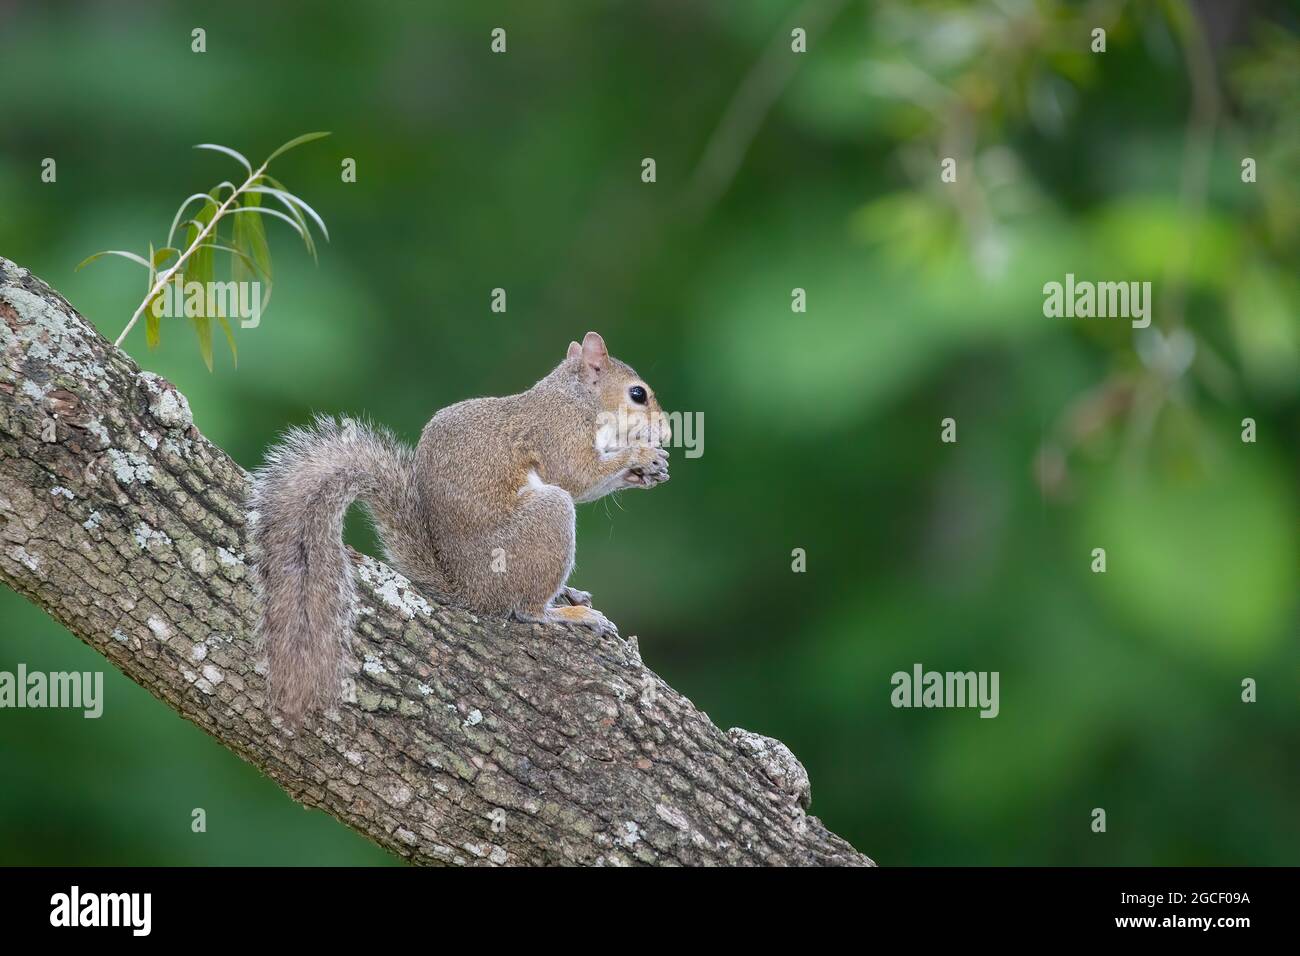 A cute squirrel snacks on a nut while sitting in a tree in the Florida Everglades. Stock Photo